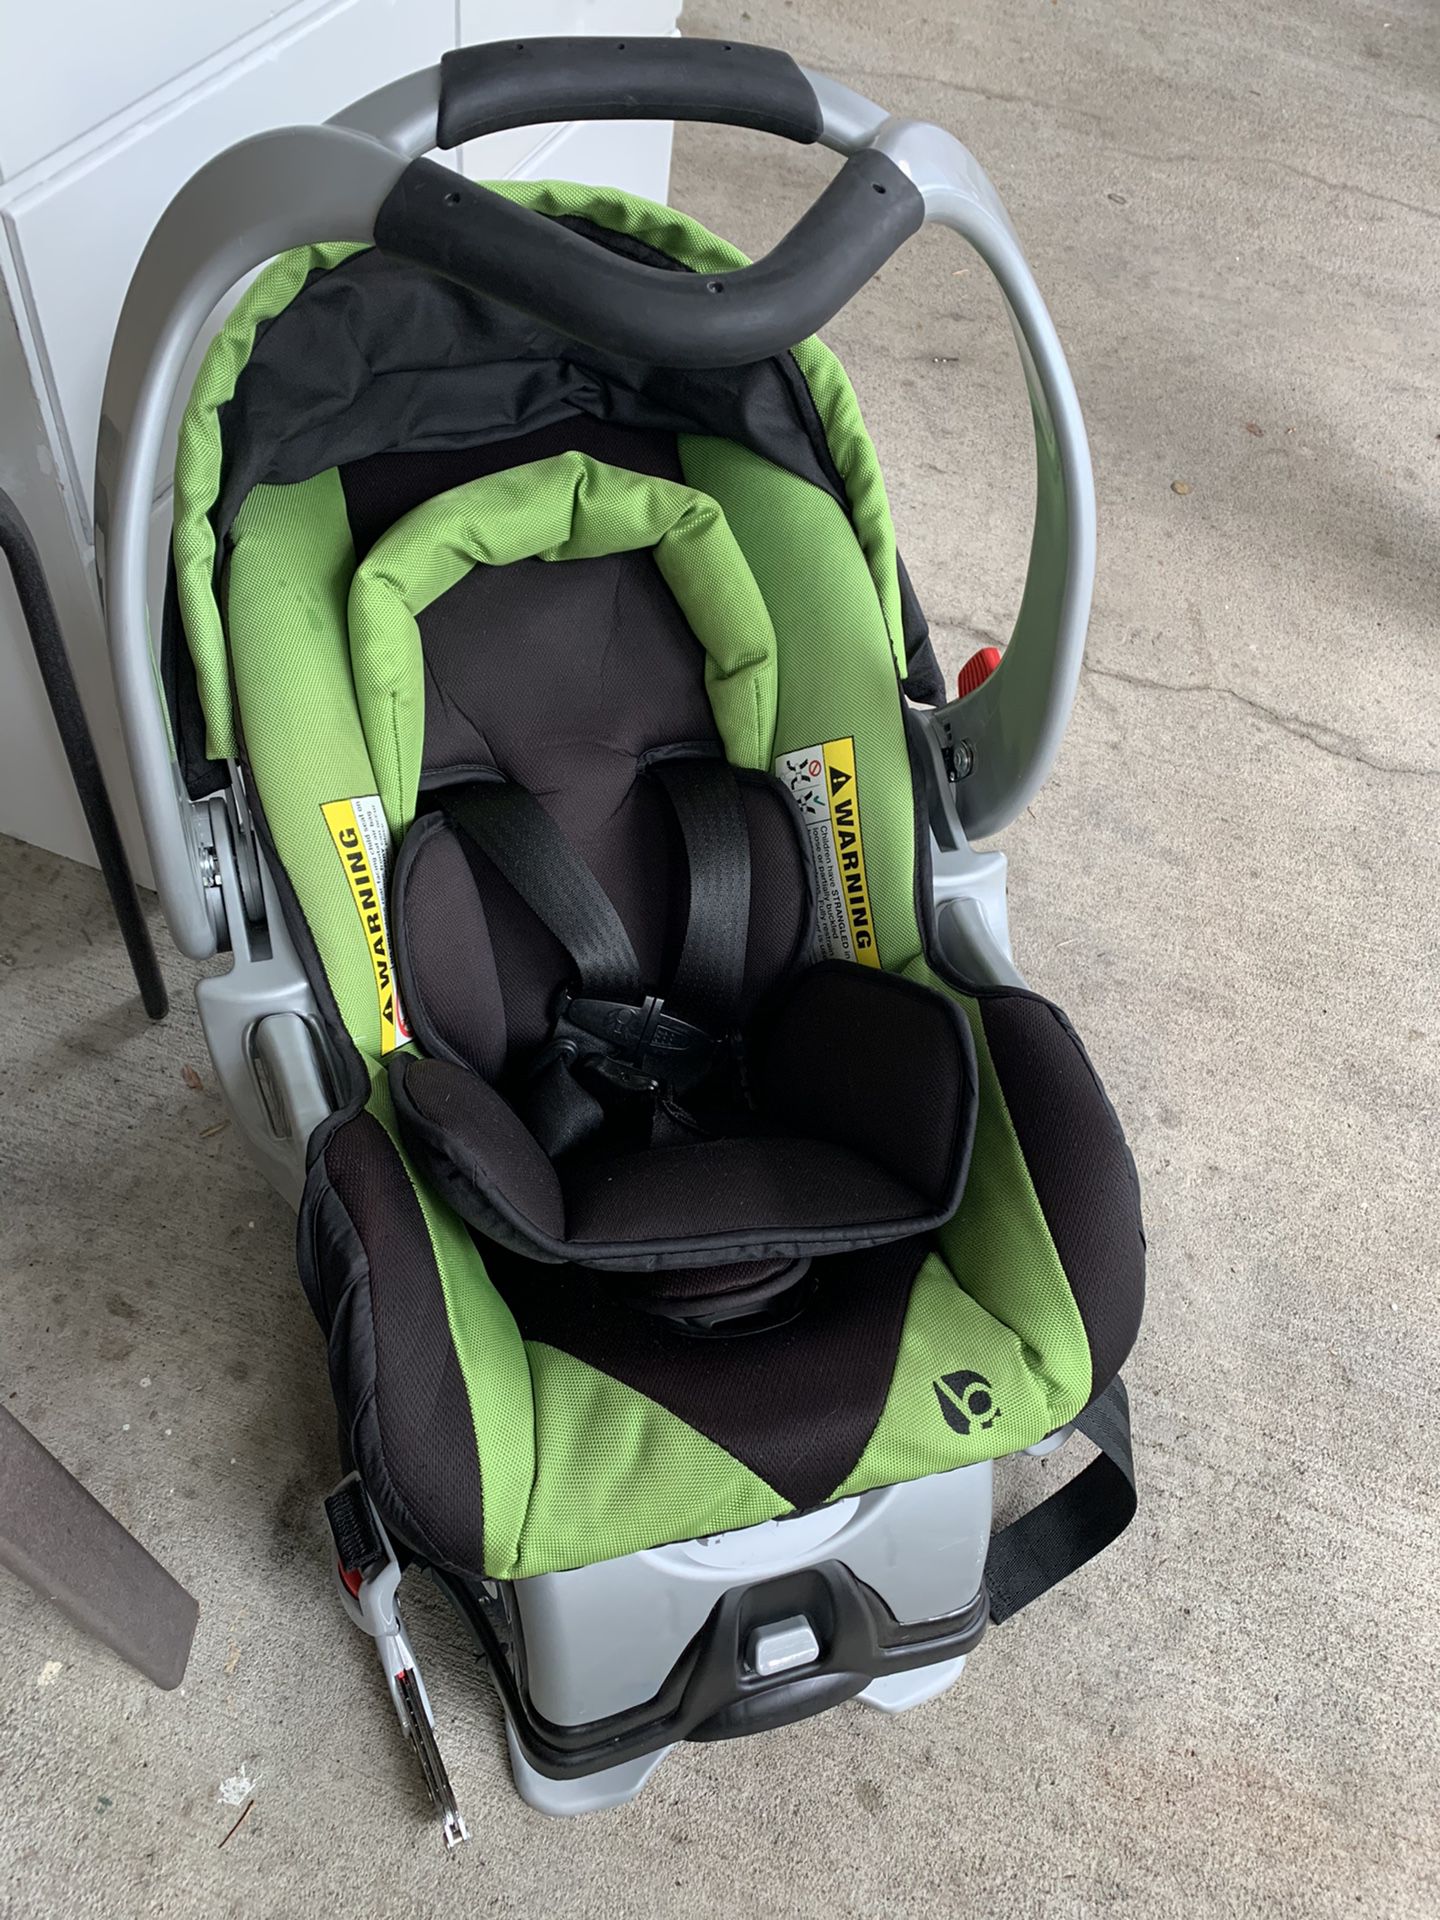 Car seat in very good condition - like new